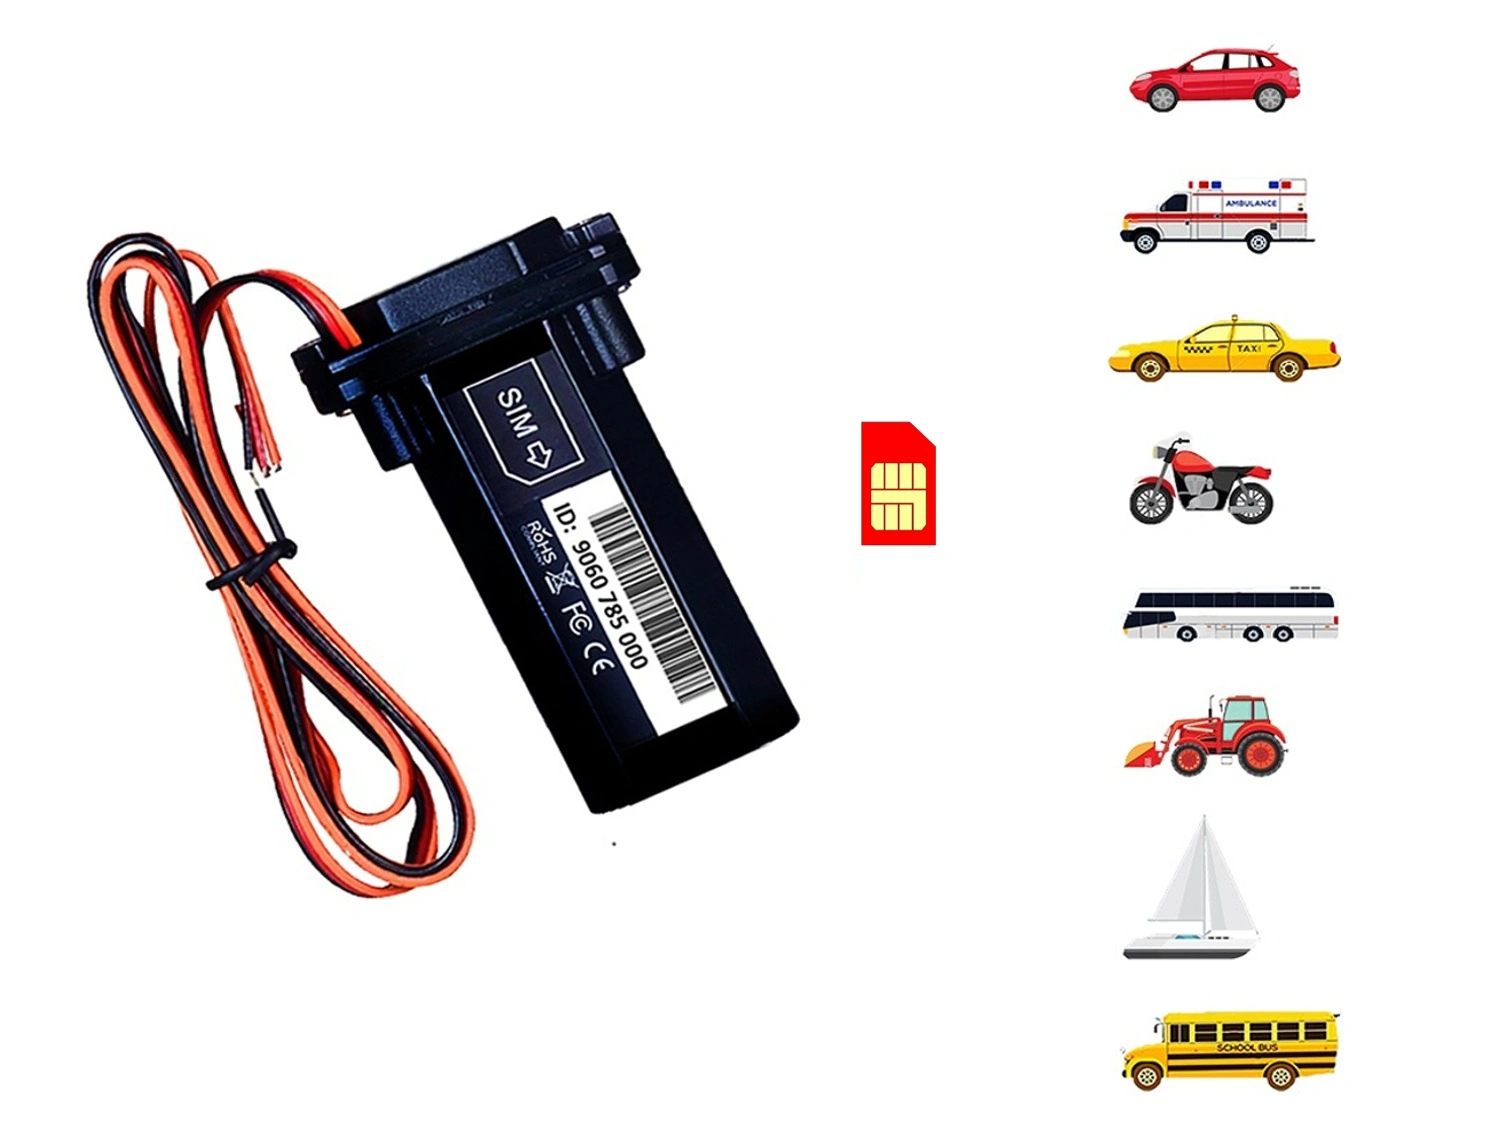 Drivool 890-IN 4G LTE GPS Tracker for Car, SUV, Bus, Bike, Auto and All Types of Vehicles-2